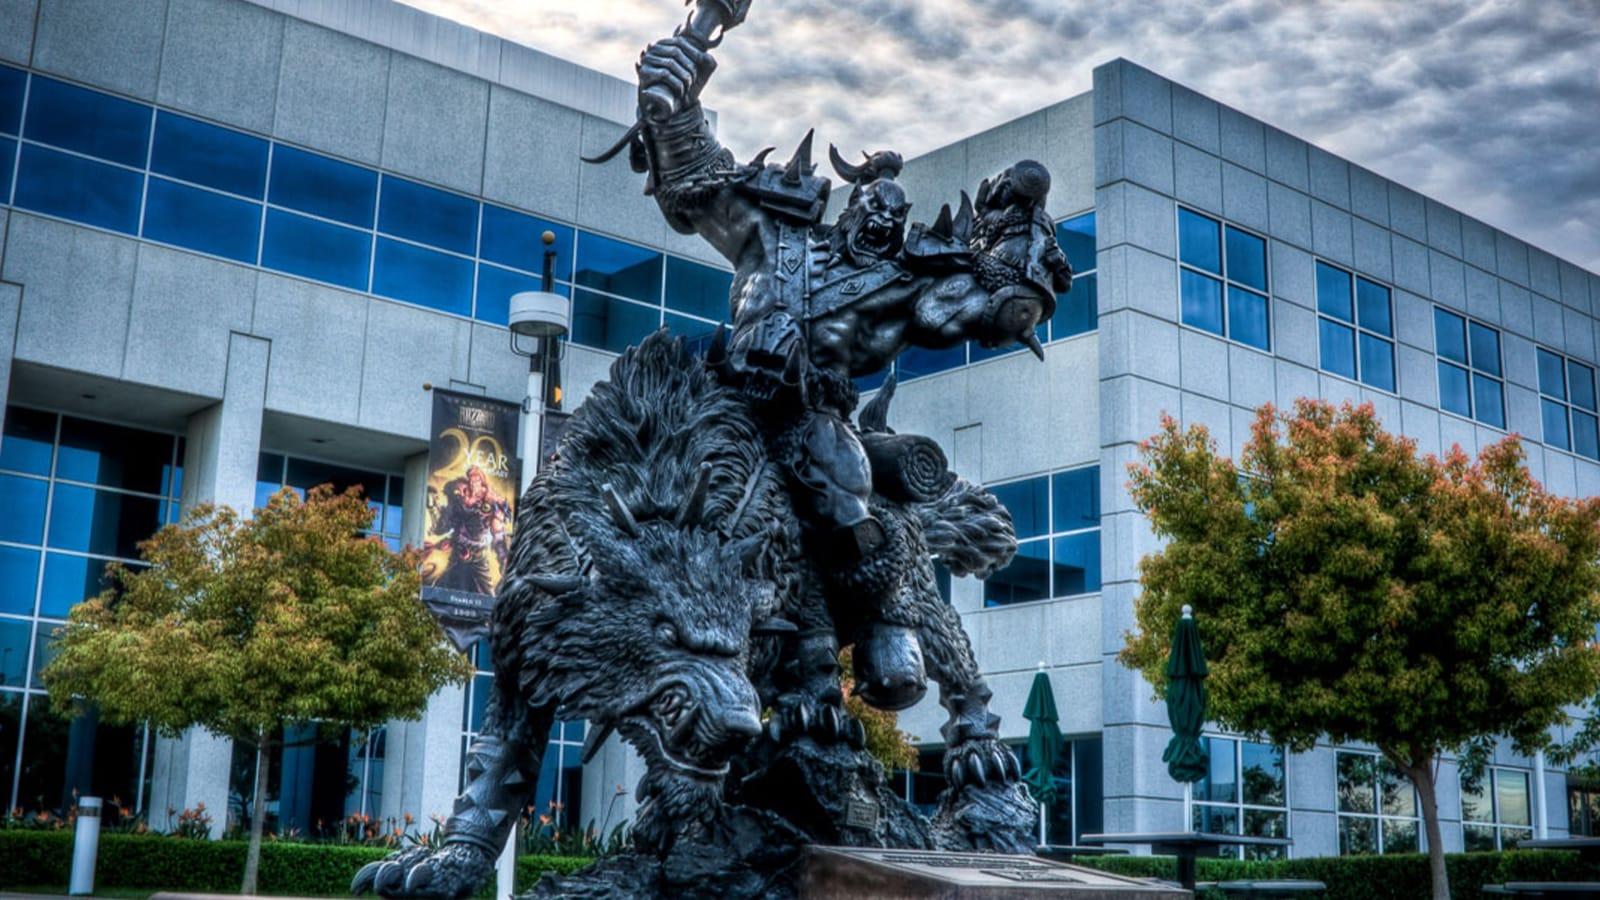 Blizzard statue in front of office